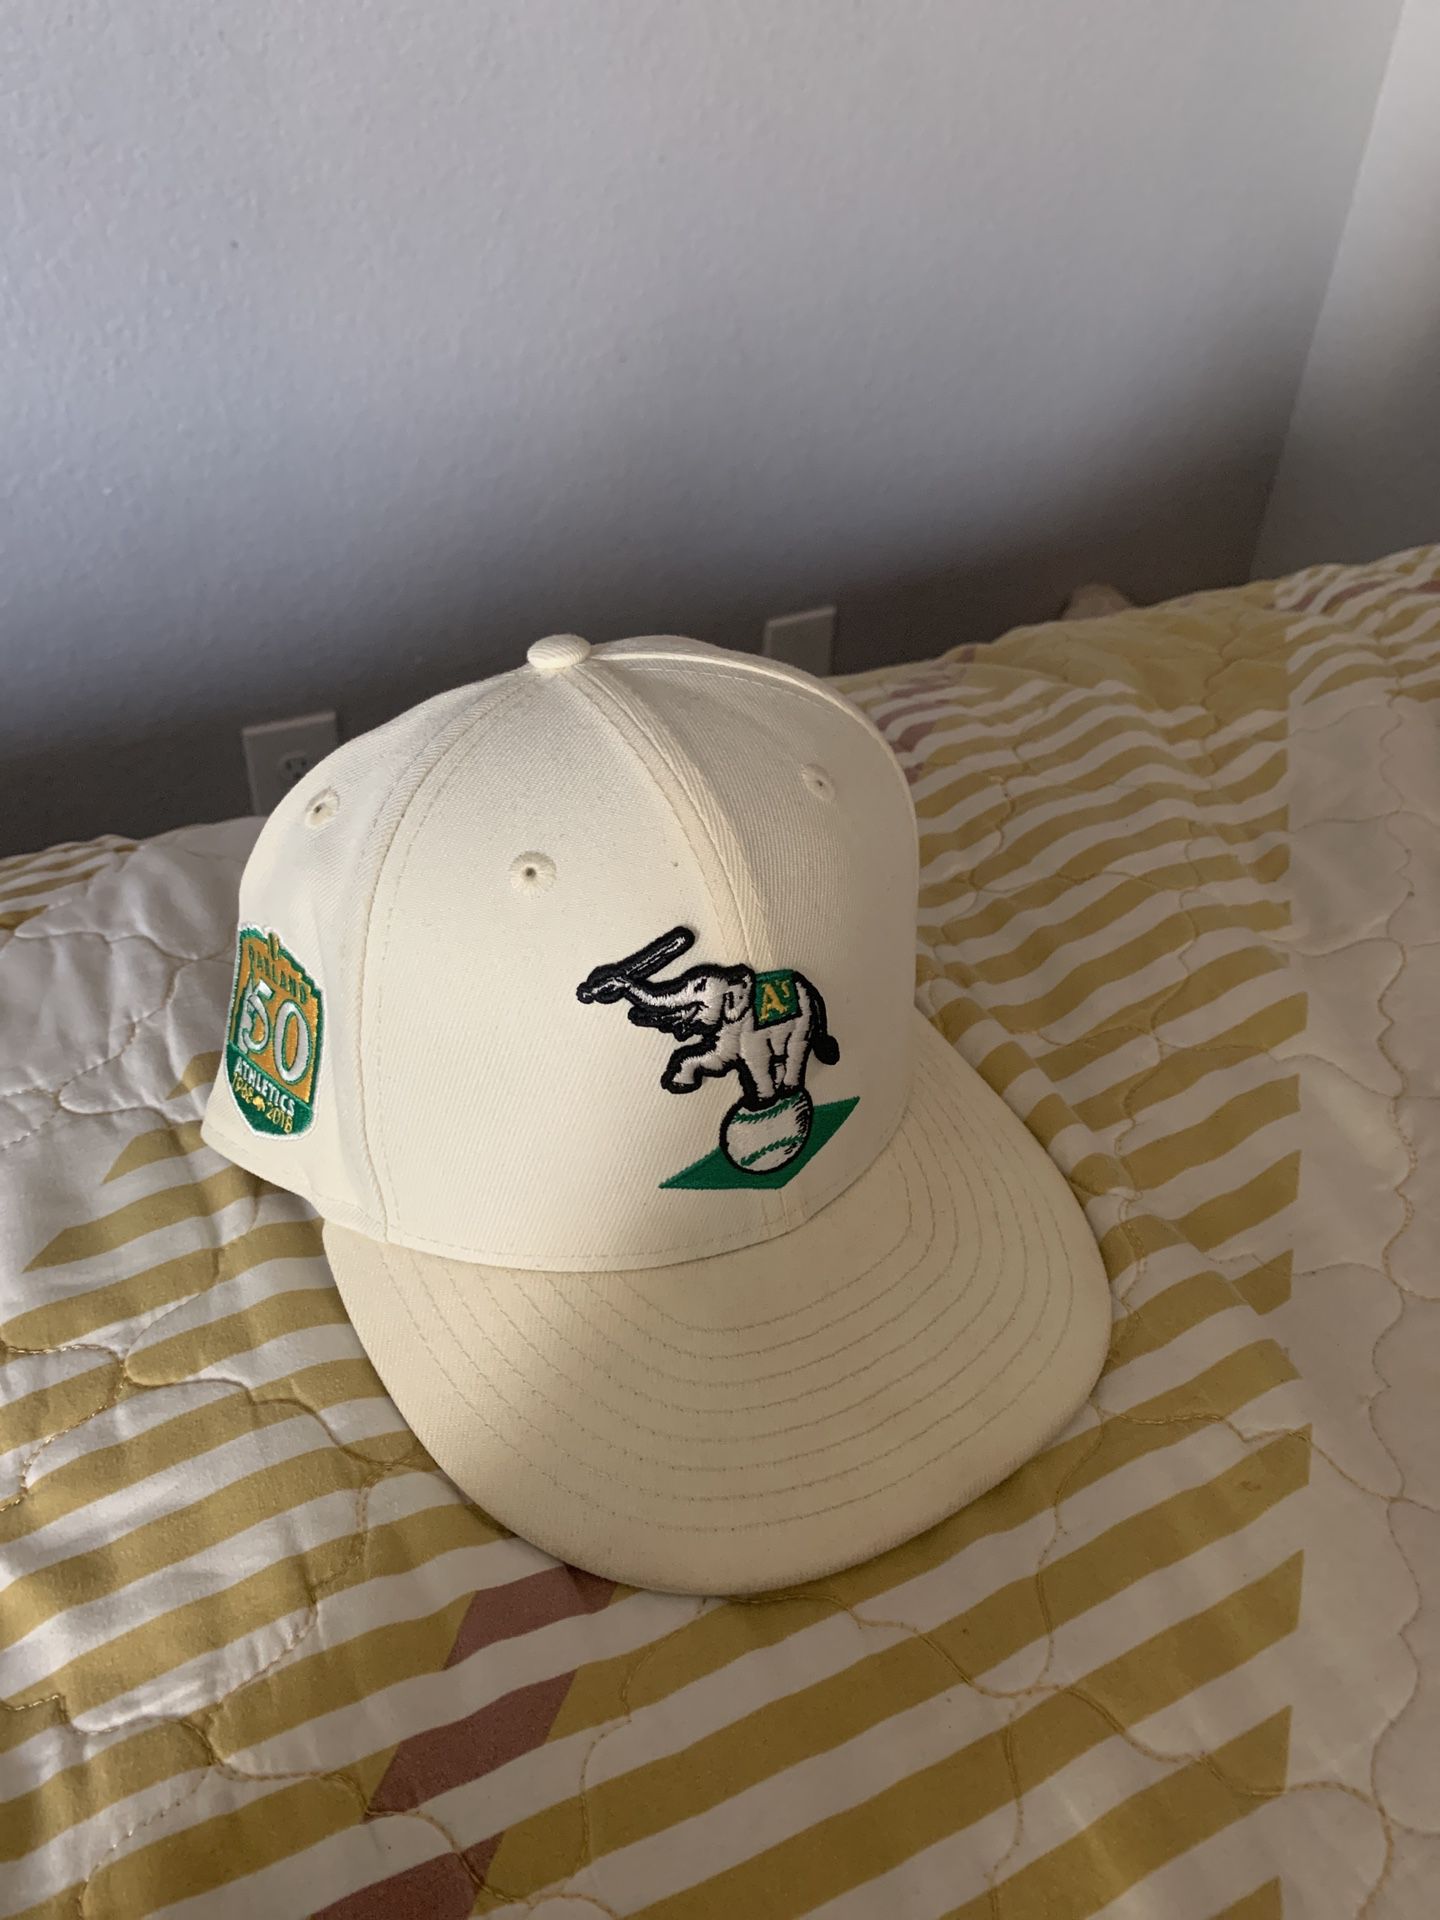 Gold Grill Indians Cap 7 1/4 for Sale in Valley Home, CA - OfferUp